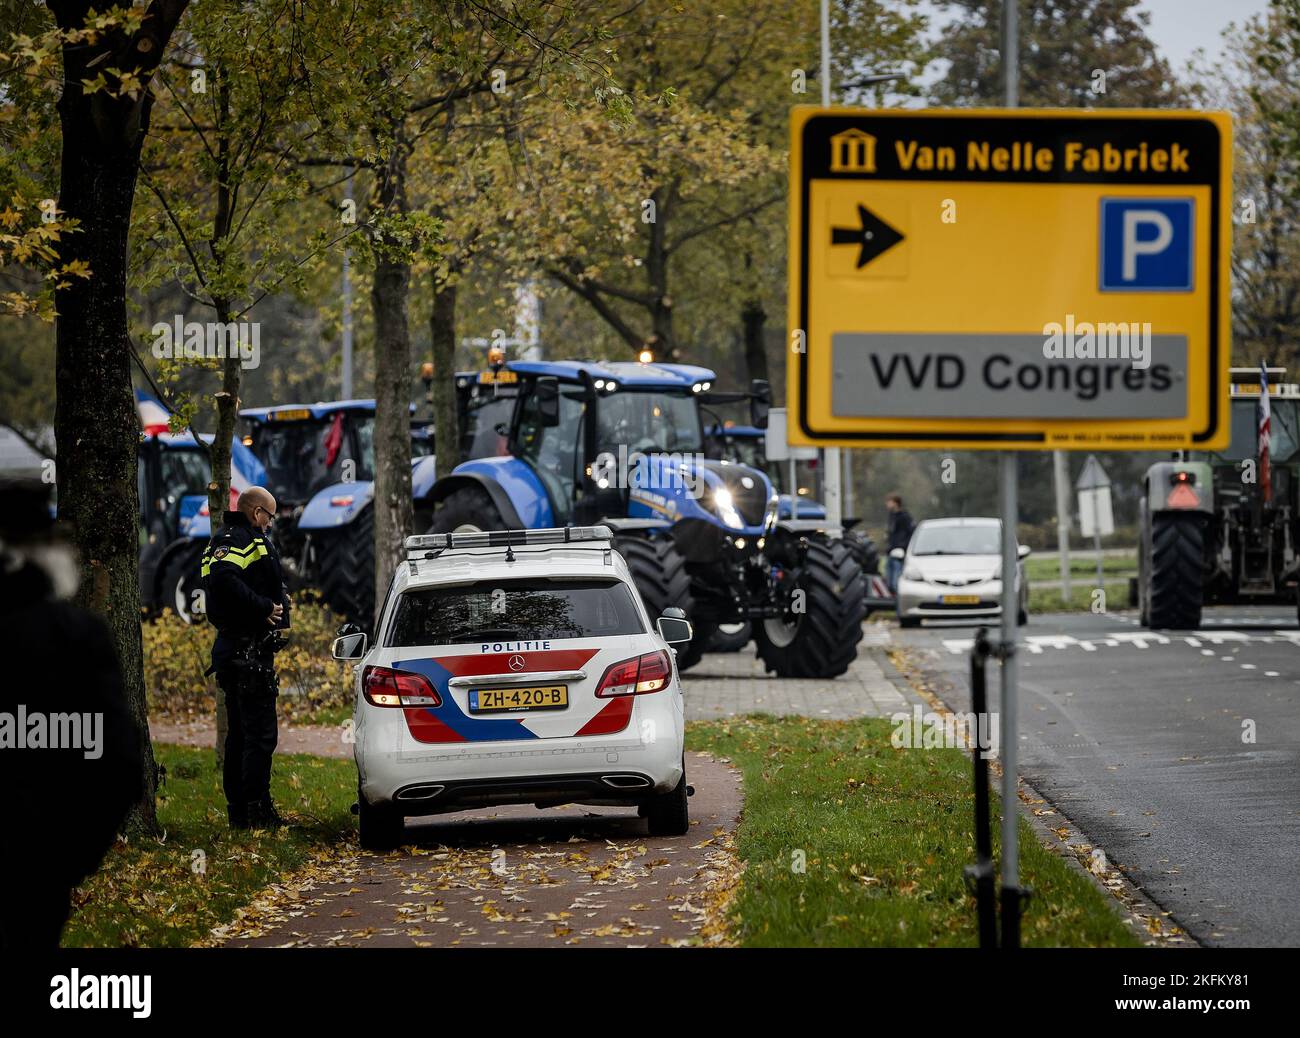 ROTTERDAM - Farmers demonstrate at the entrance of the Van Nelle Factory prior to the autumn congress of the VVD. ANP REMKO DE WAAL netherlands out - belgium out Stock Photo